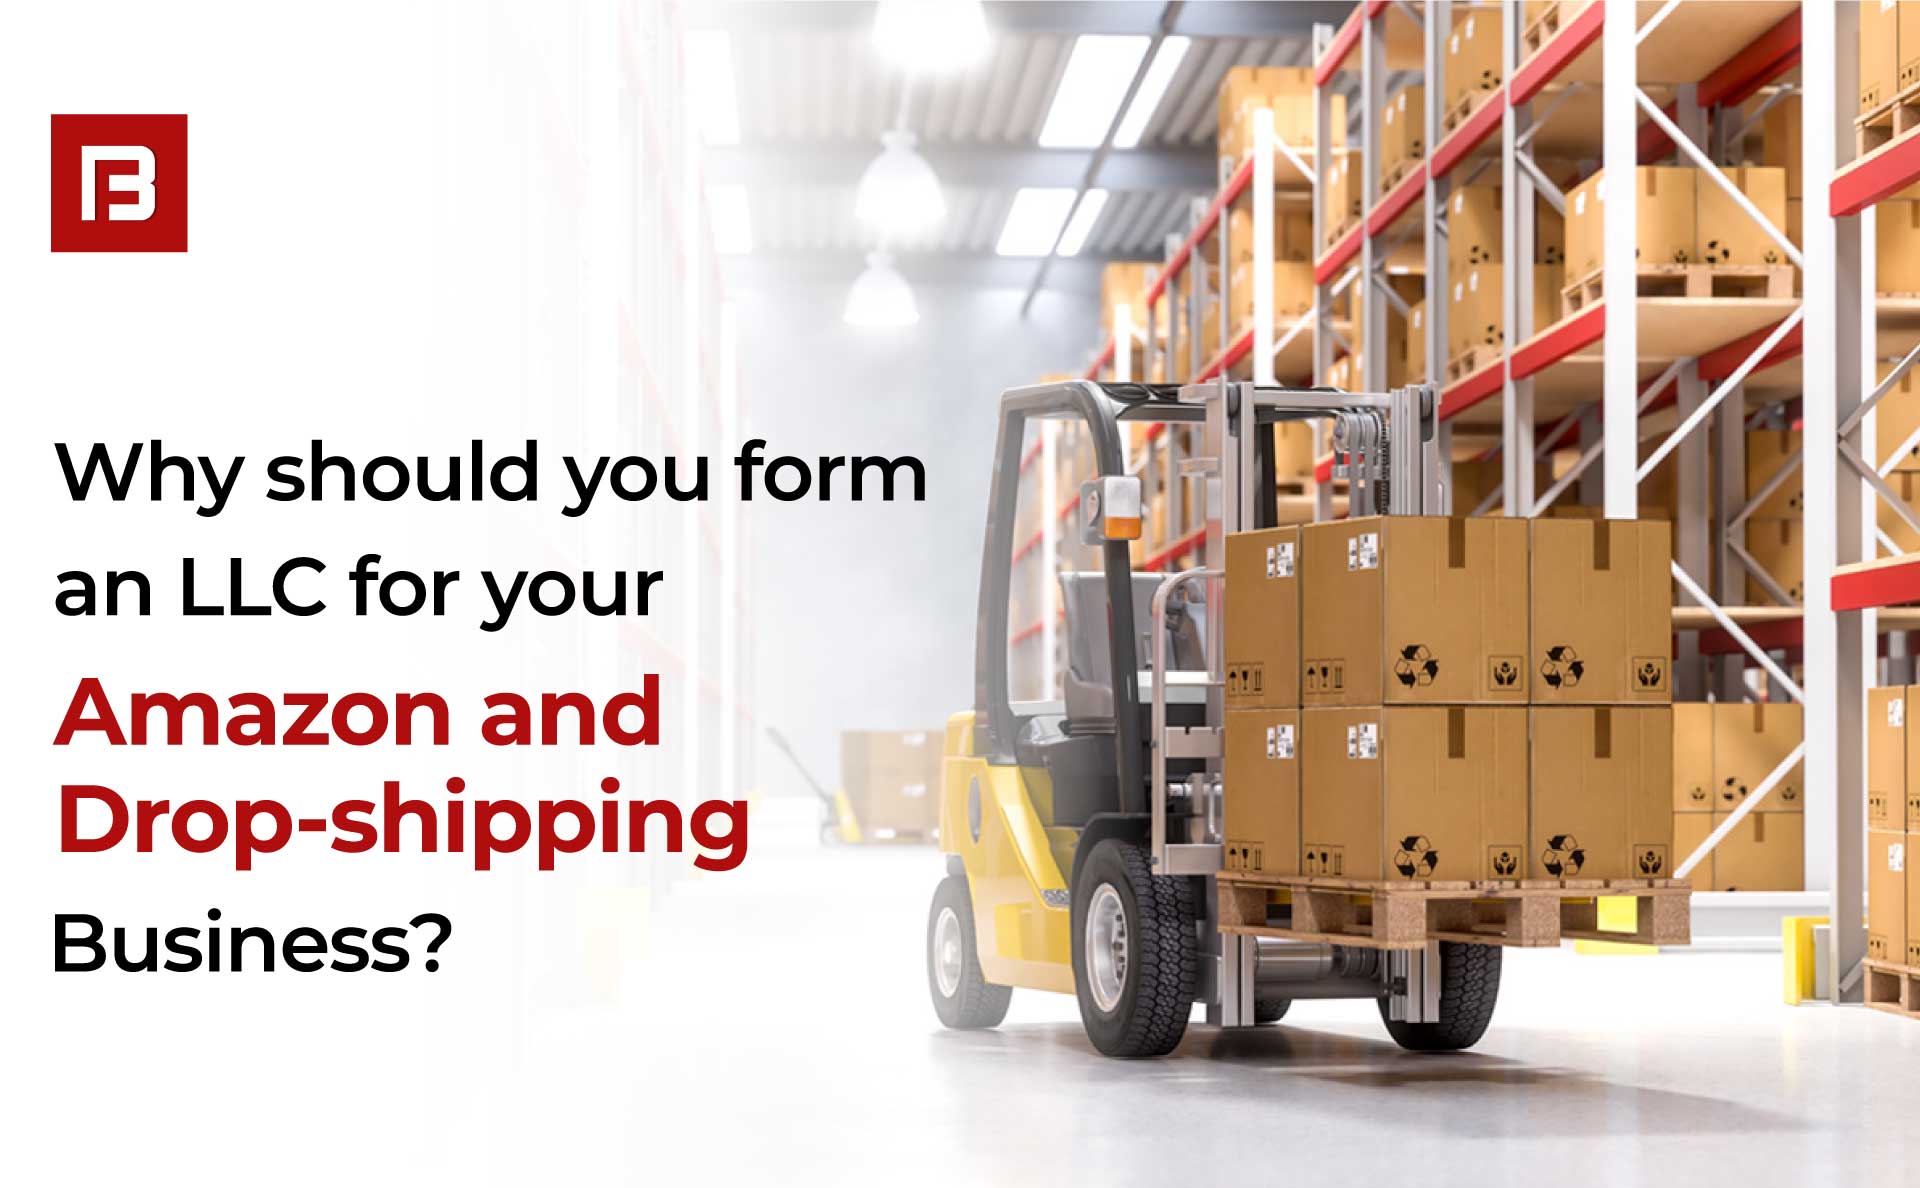 Why Should You Form an LLC for Your Amazon or Drop-shipping Business?